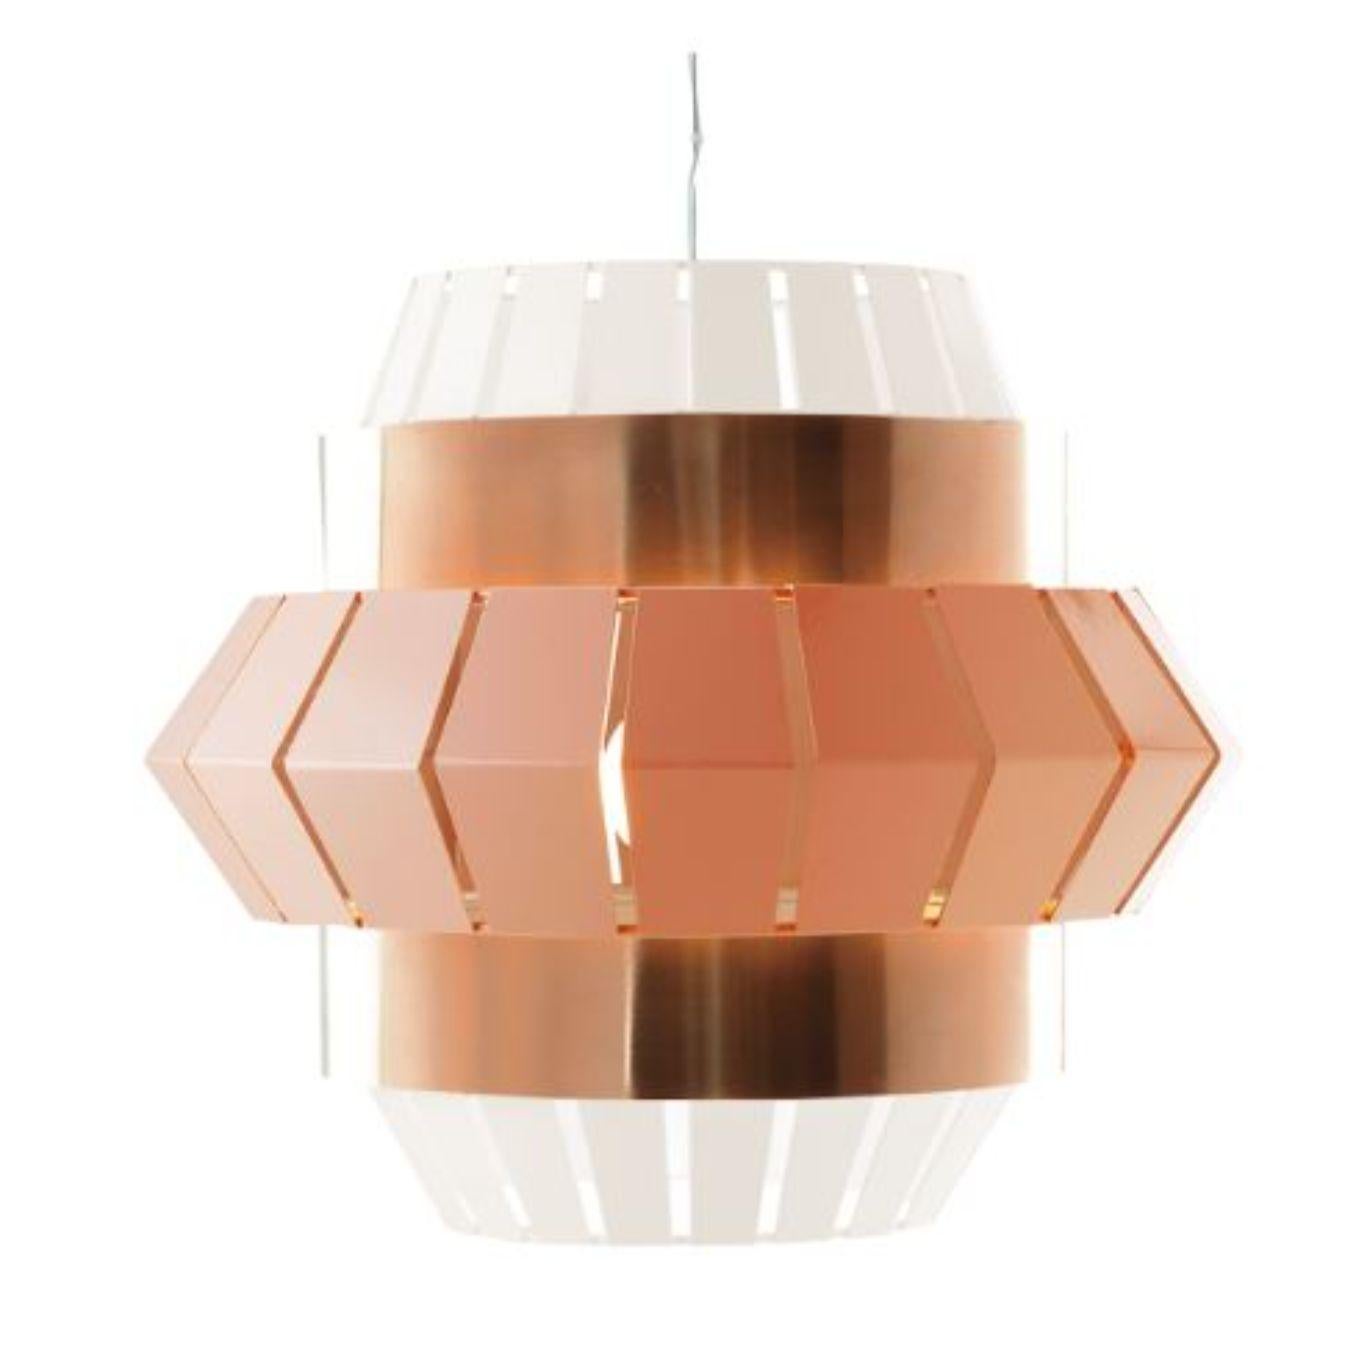 Ivory and Salmon comb suspension lamp with copper ring by Dooq.
Dimensions: W 74 x D 74 x H 60 cm
Materials: lacquered metal, polished copper.
Also available in different colors and materials.

Information:
230V/50Hz
E27/1x20W